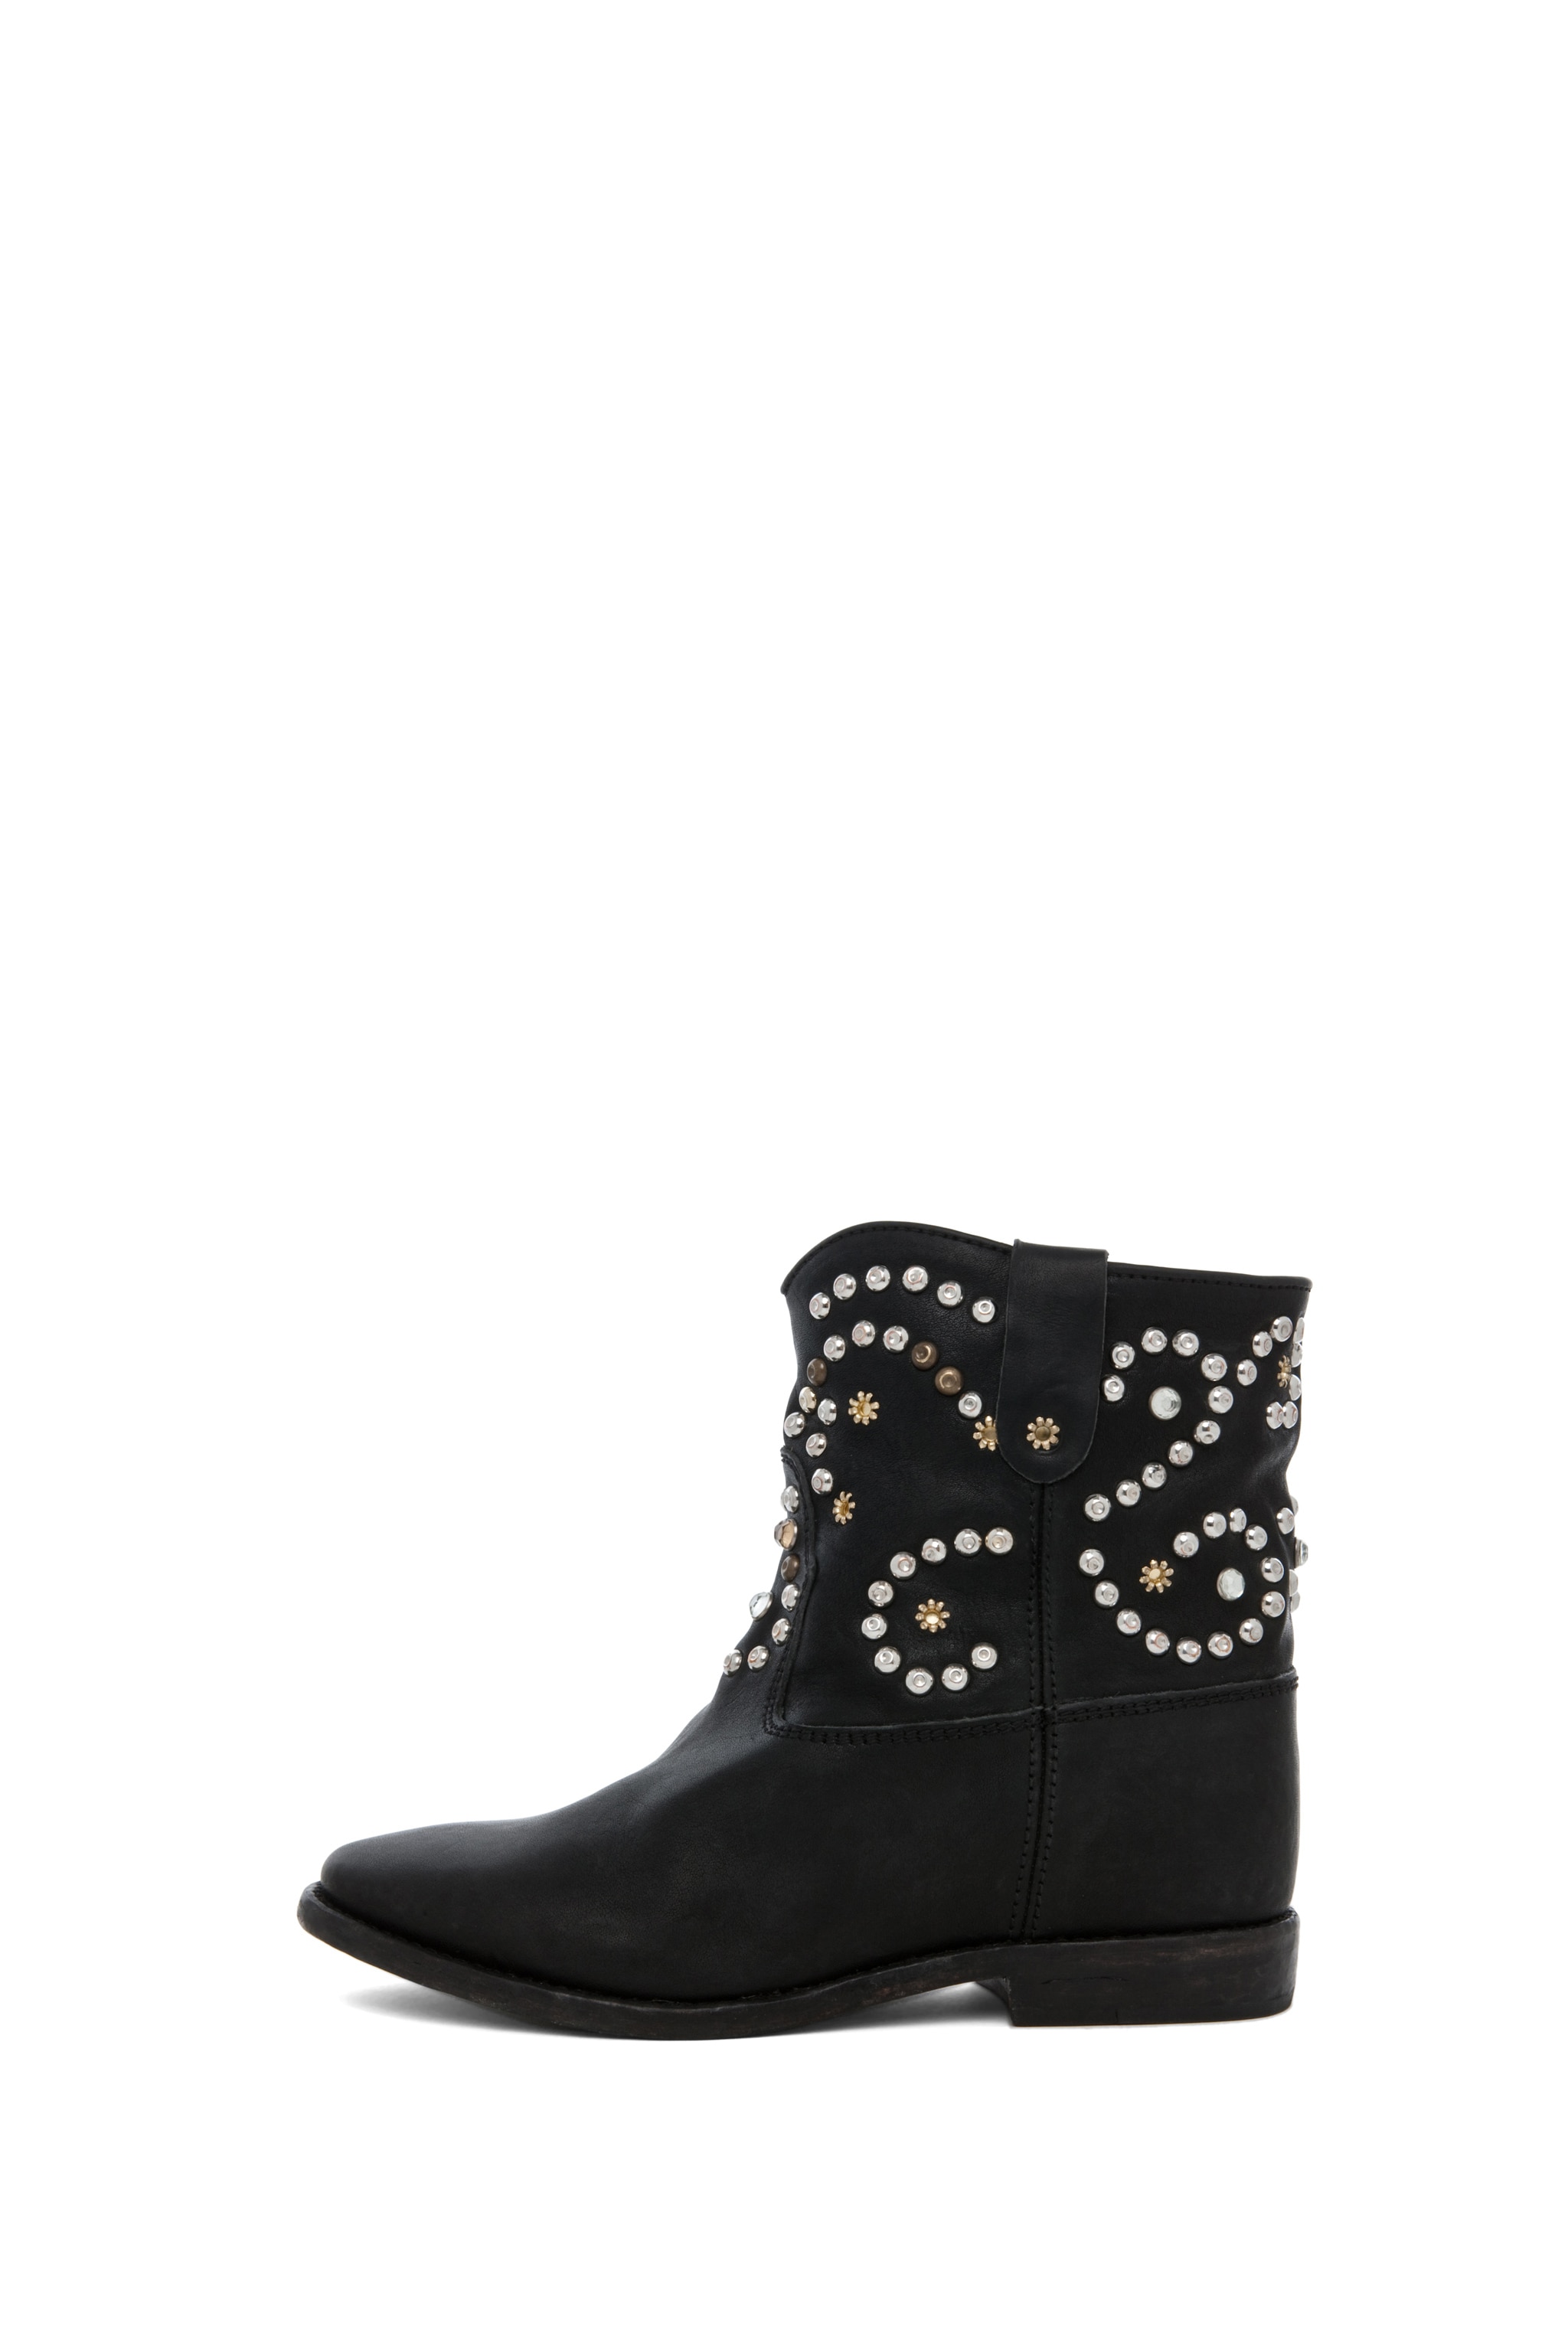 Image 1 of Isabel Marant Caleen Studded Bootie in Black